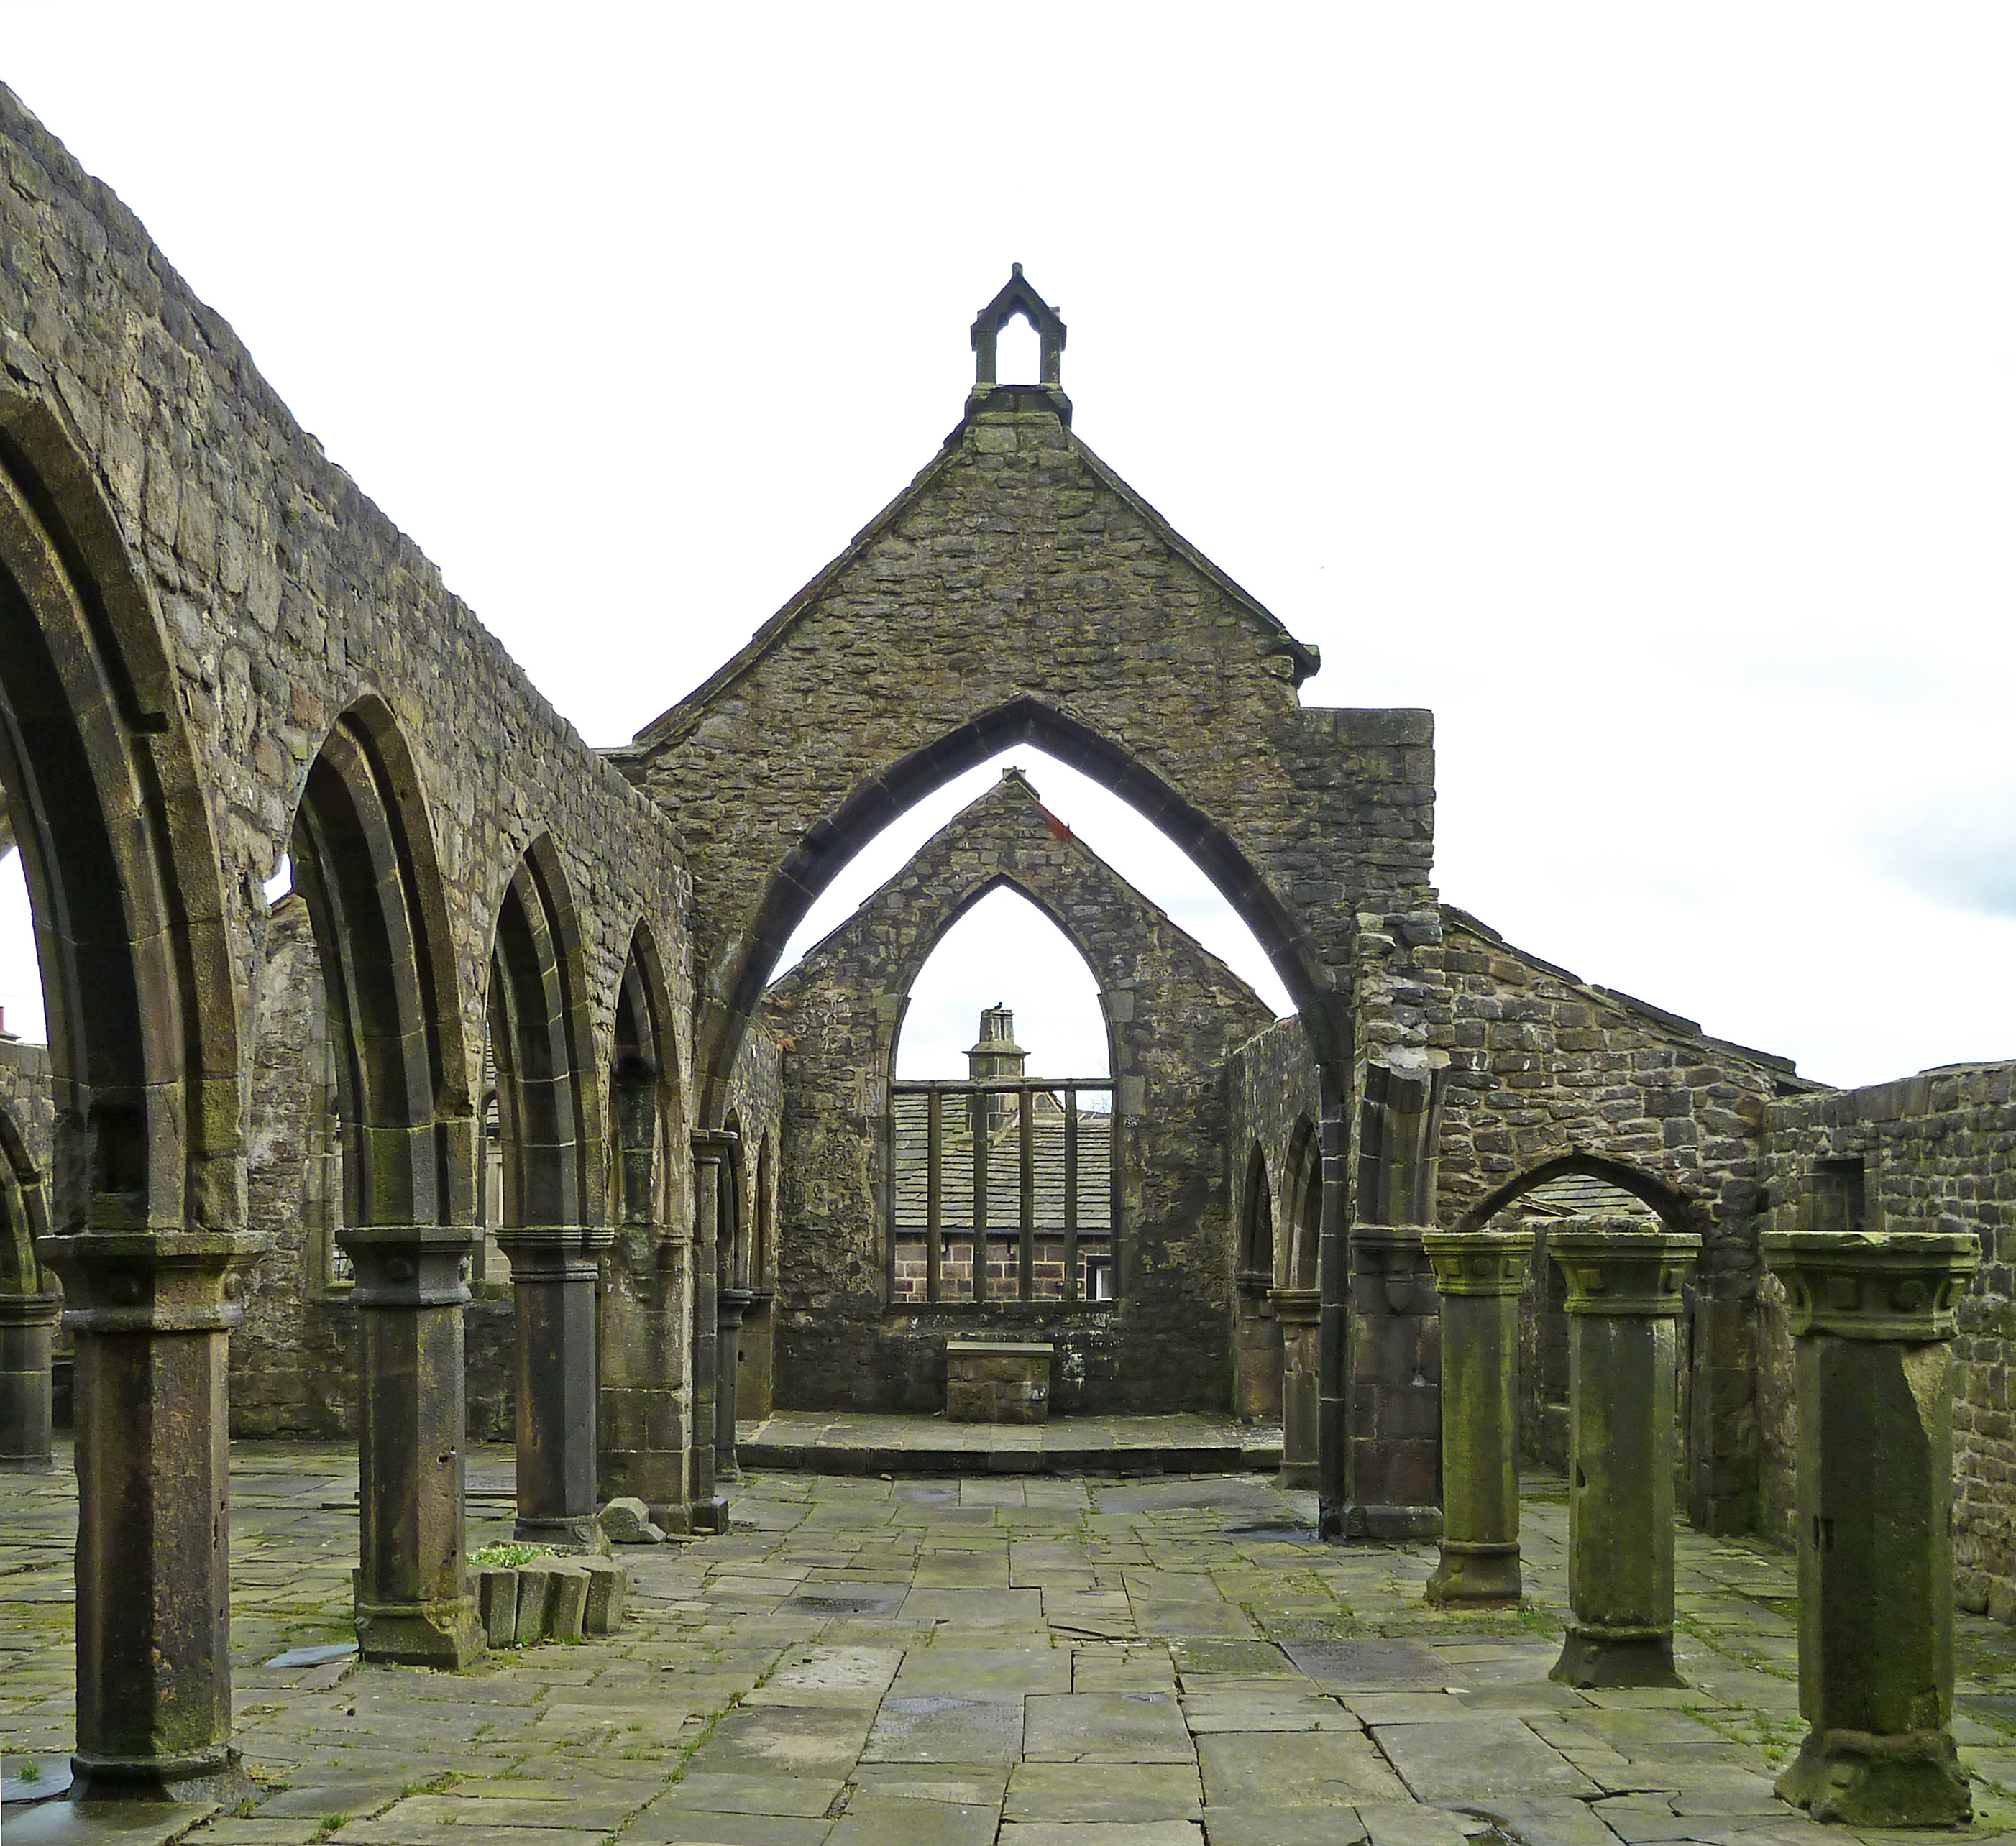 File:Ruins of Heptonstall Old Church.jpg - Wikimedia Commons